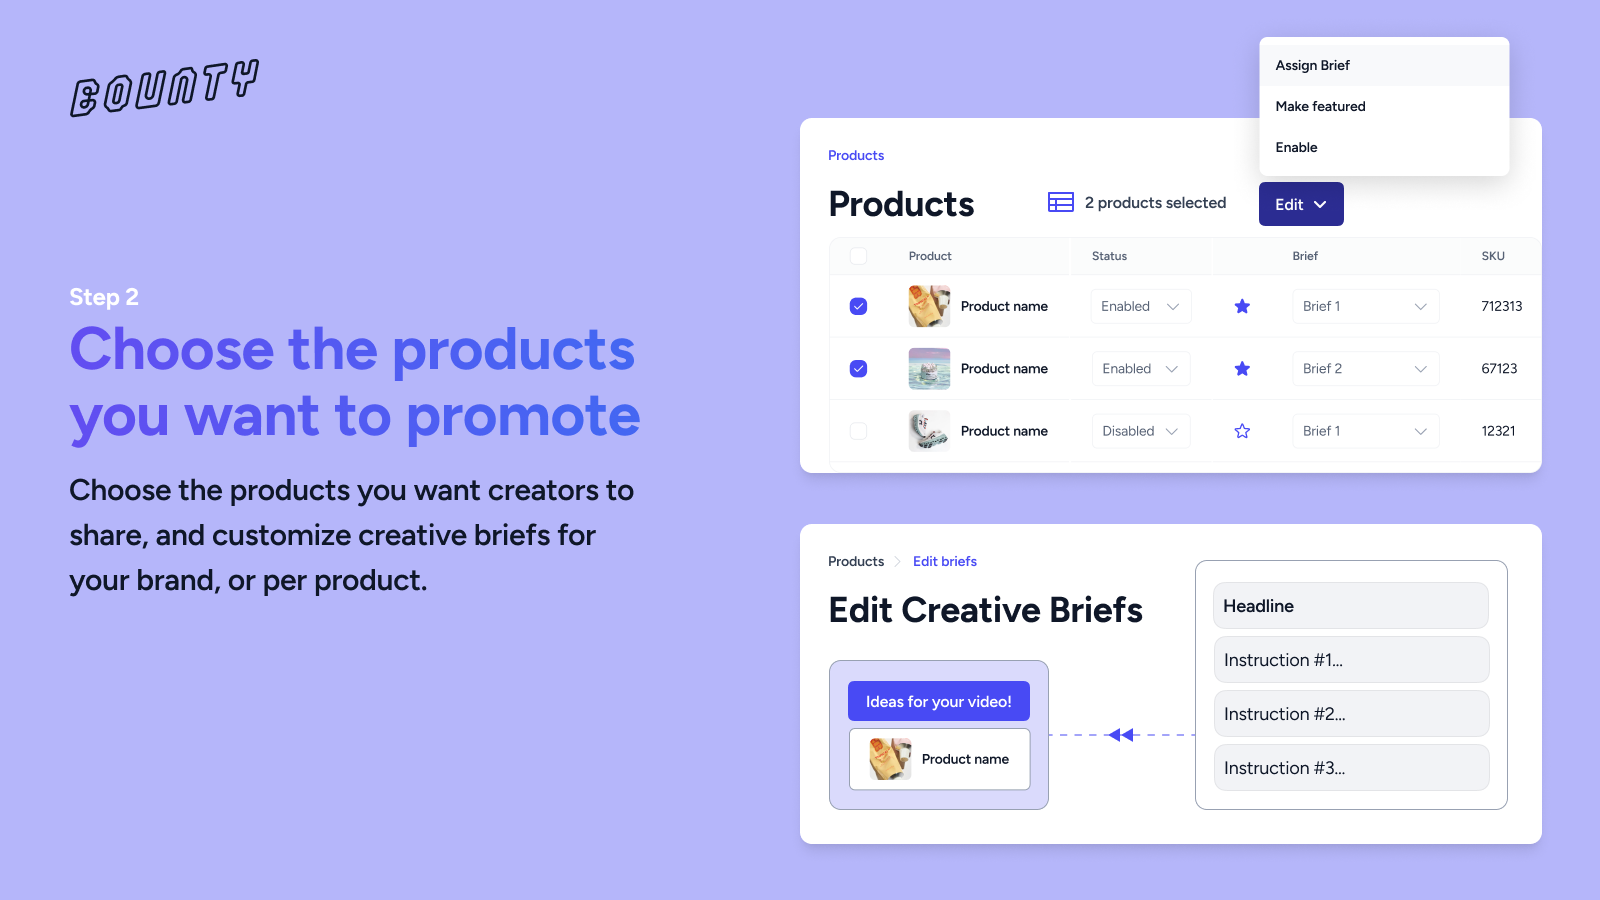 Step 2 - Configure your products & creative briefs